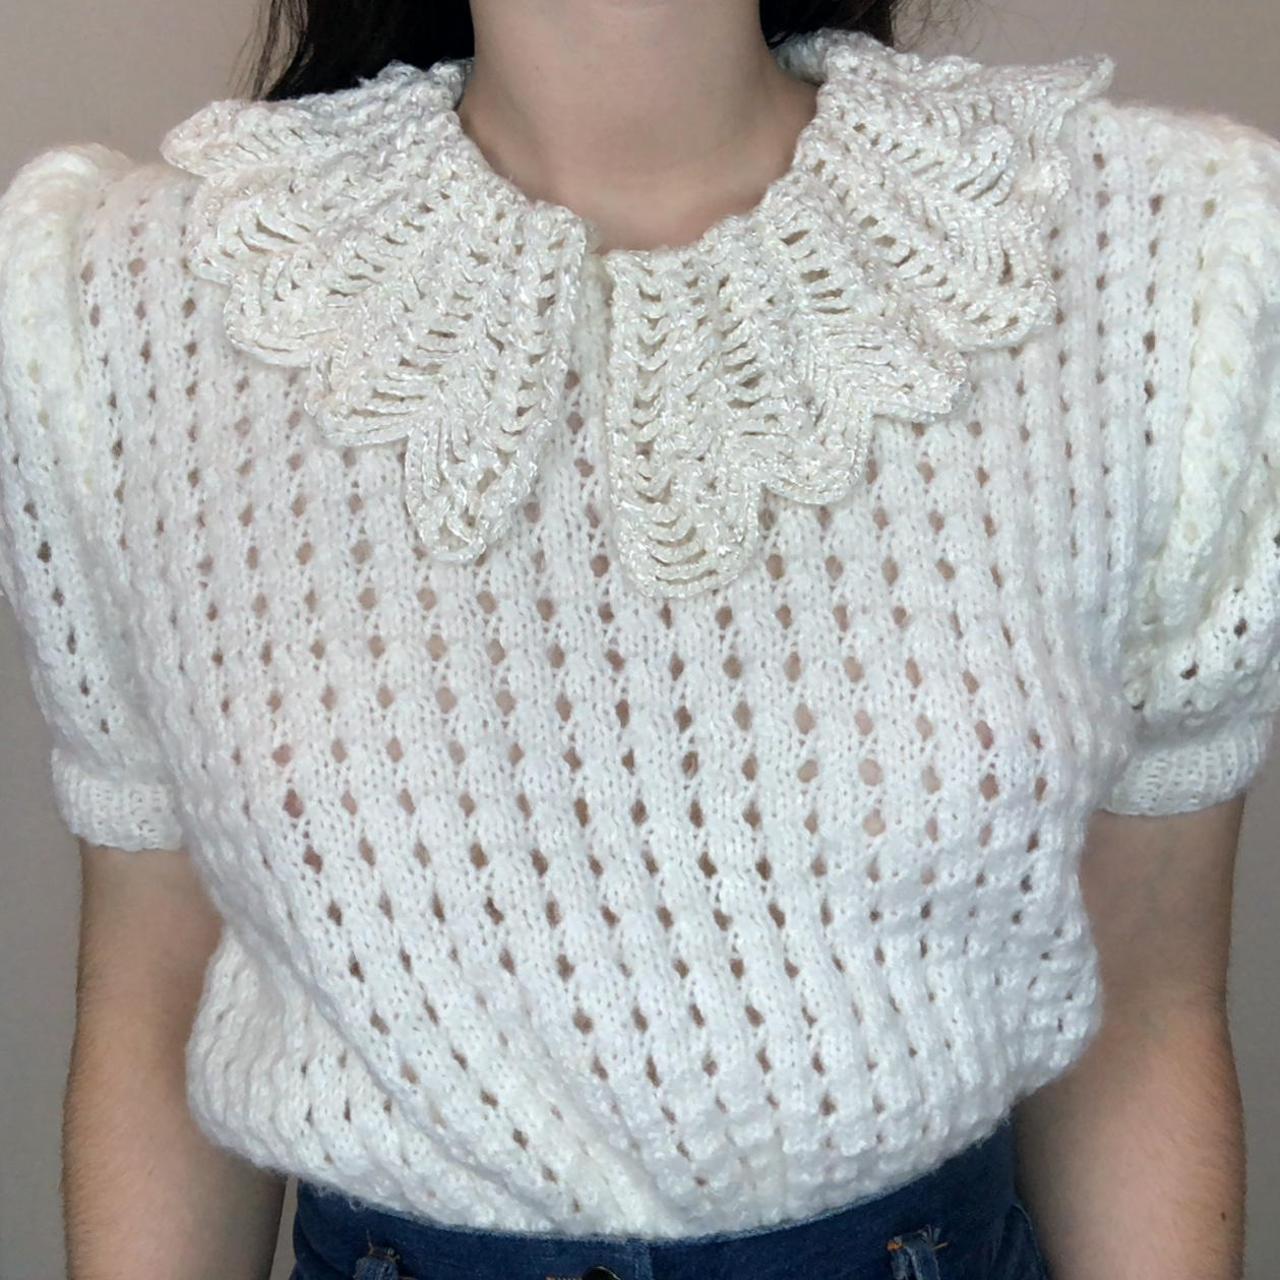 Vintage 40s look-a-like crochet sweater top with... - Depop